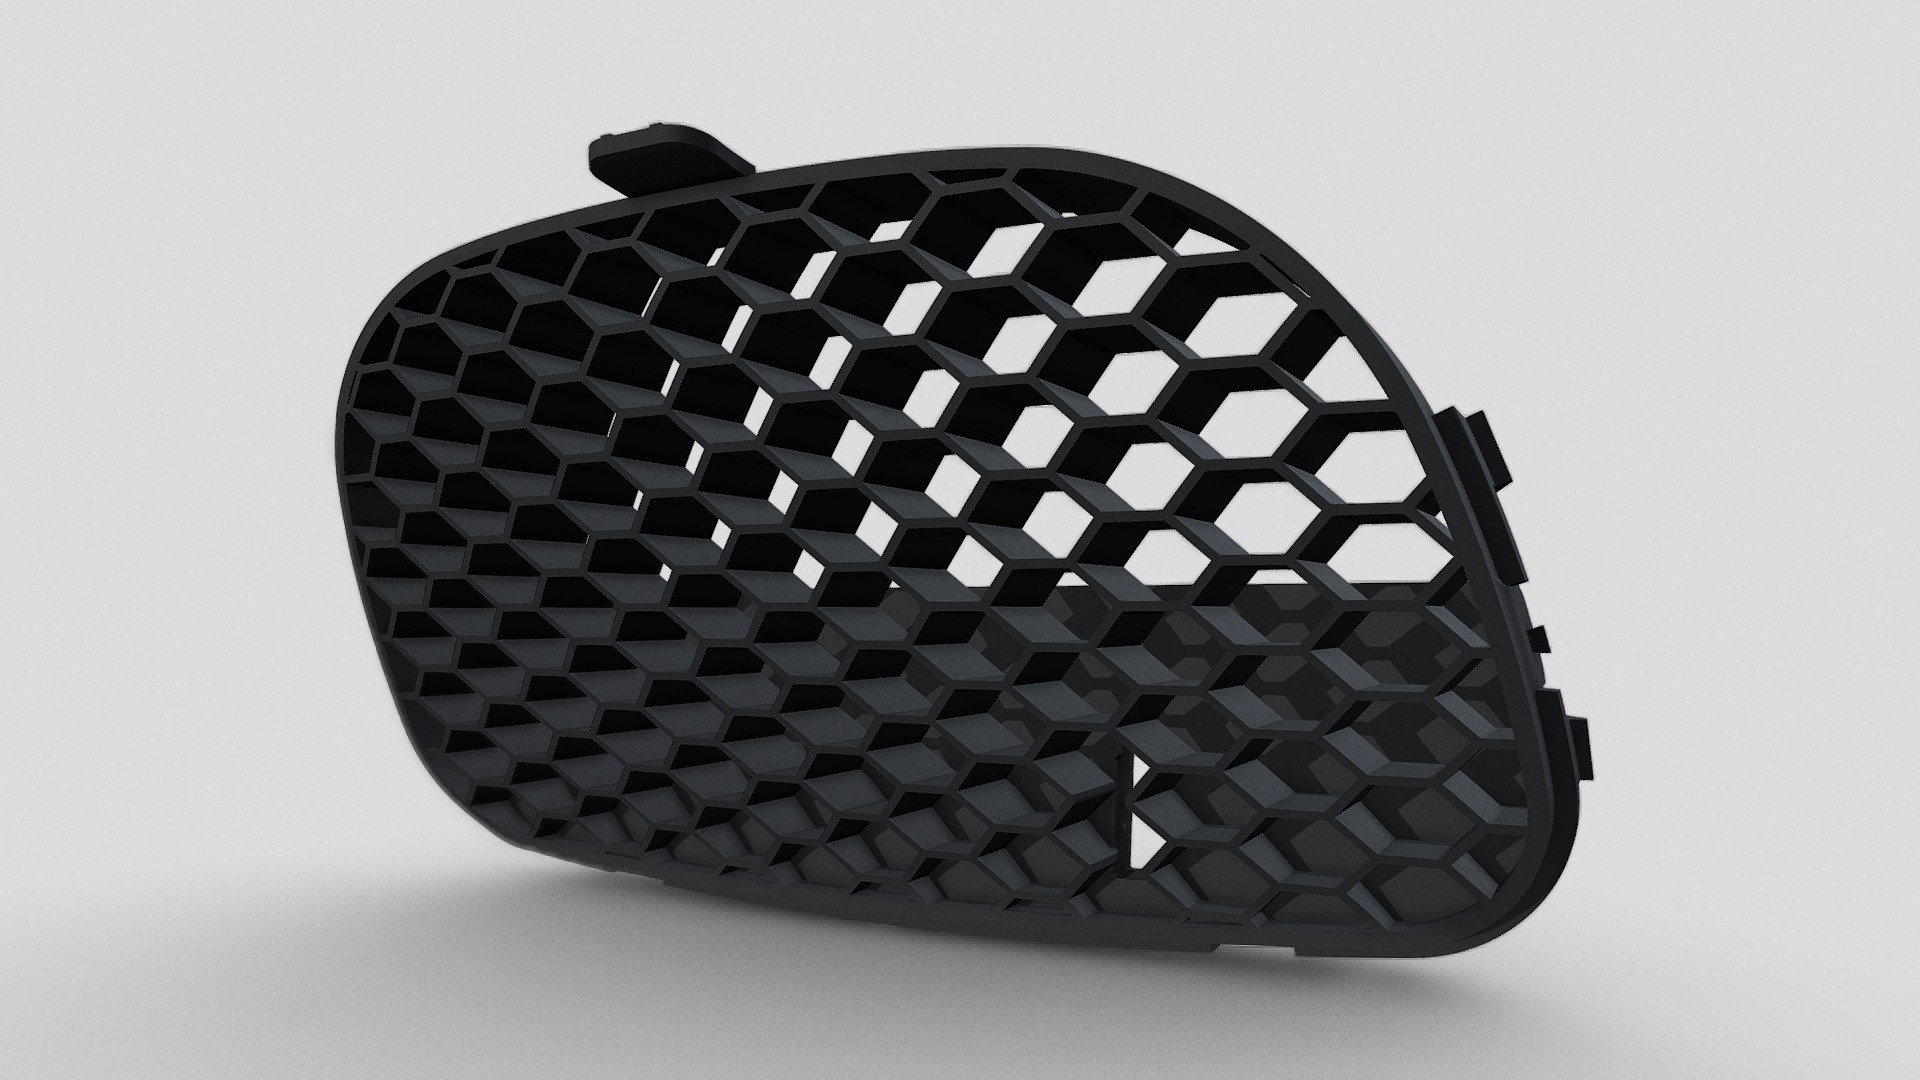 This is a 3d scan of a Seat Leon Cupra R Mk1 Badge Grill that has been modified to remove the Seat &lsquo;S' logo and replace the vertical bars with a plain hexagonal structure throughout the whole grill. The file was used to 3d print custom badge grill for a customer.

In the download we have incuded an STL suitable for 3d printing but also Iges and Step files in case you require to mod the design 3d model